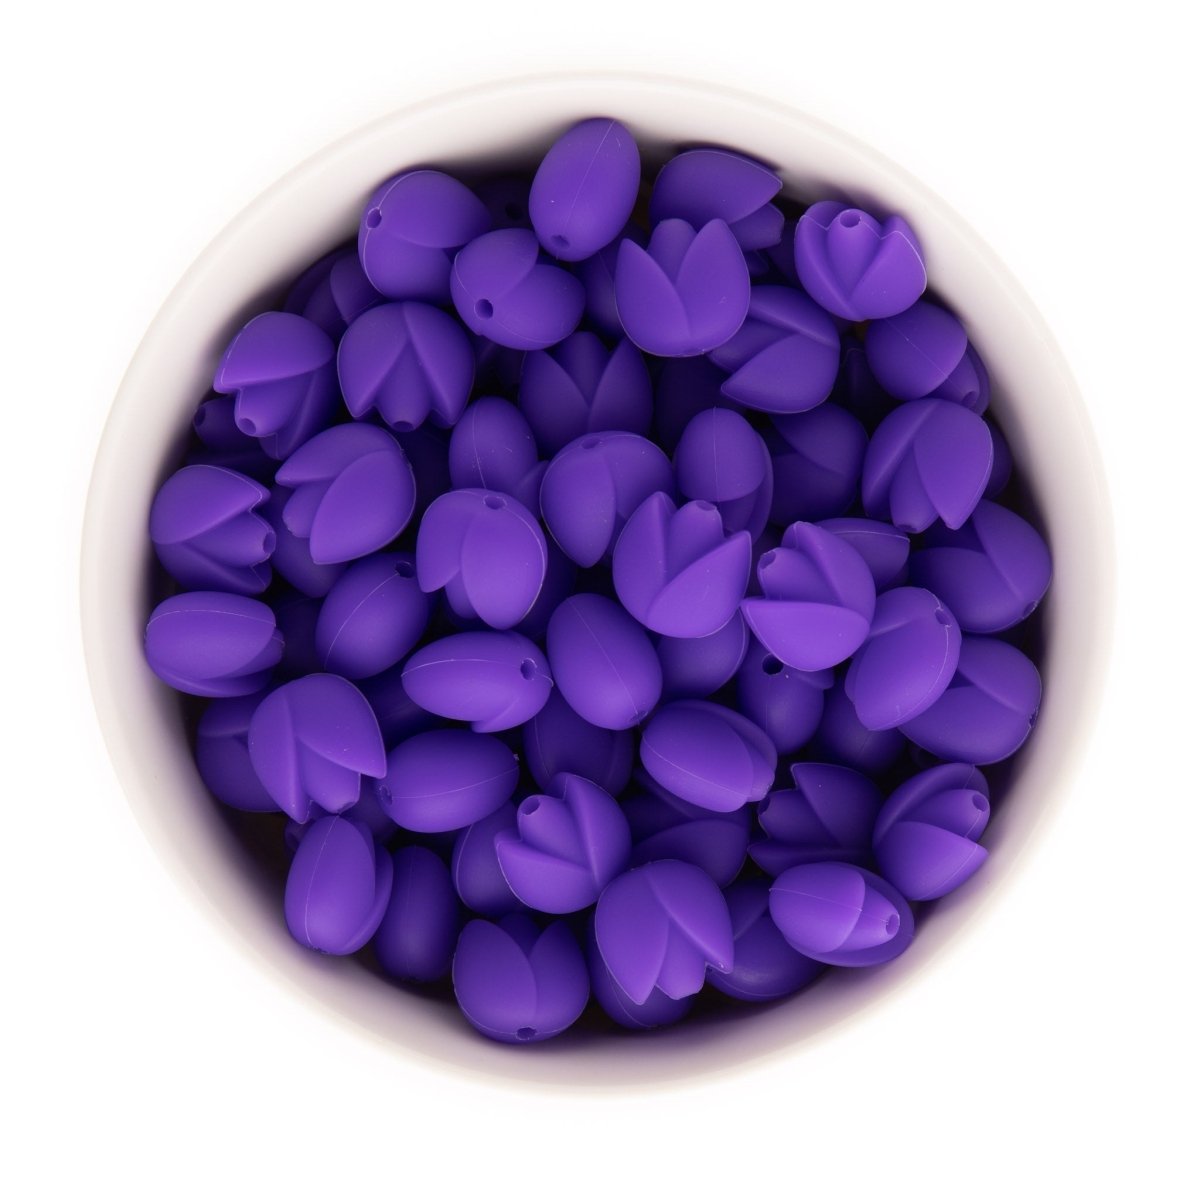 Silicone Focal Beads Tulips Perennial Purple from Cara & Co Craft Supply